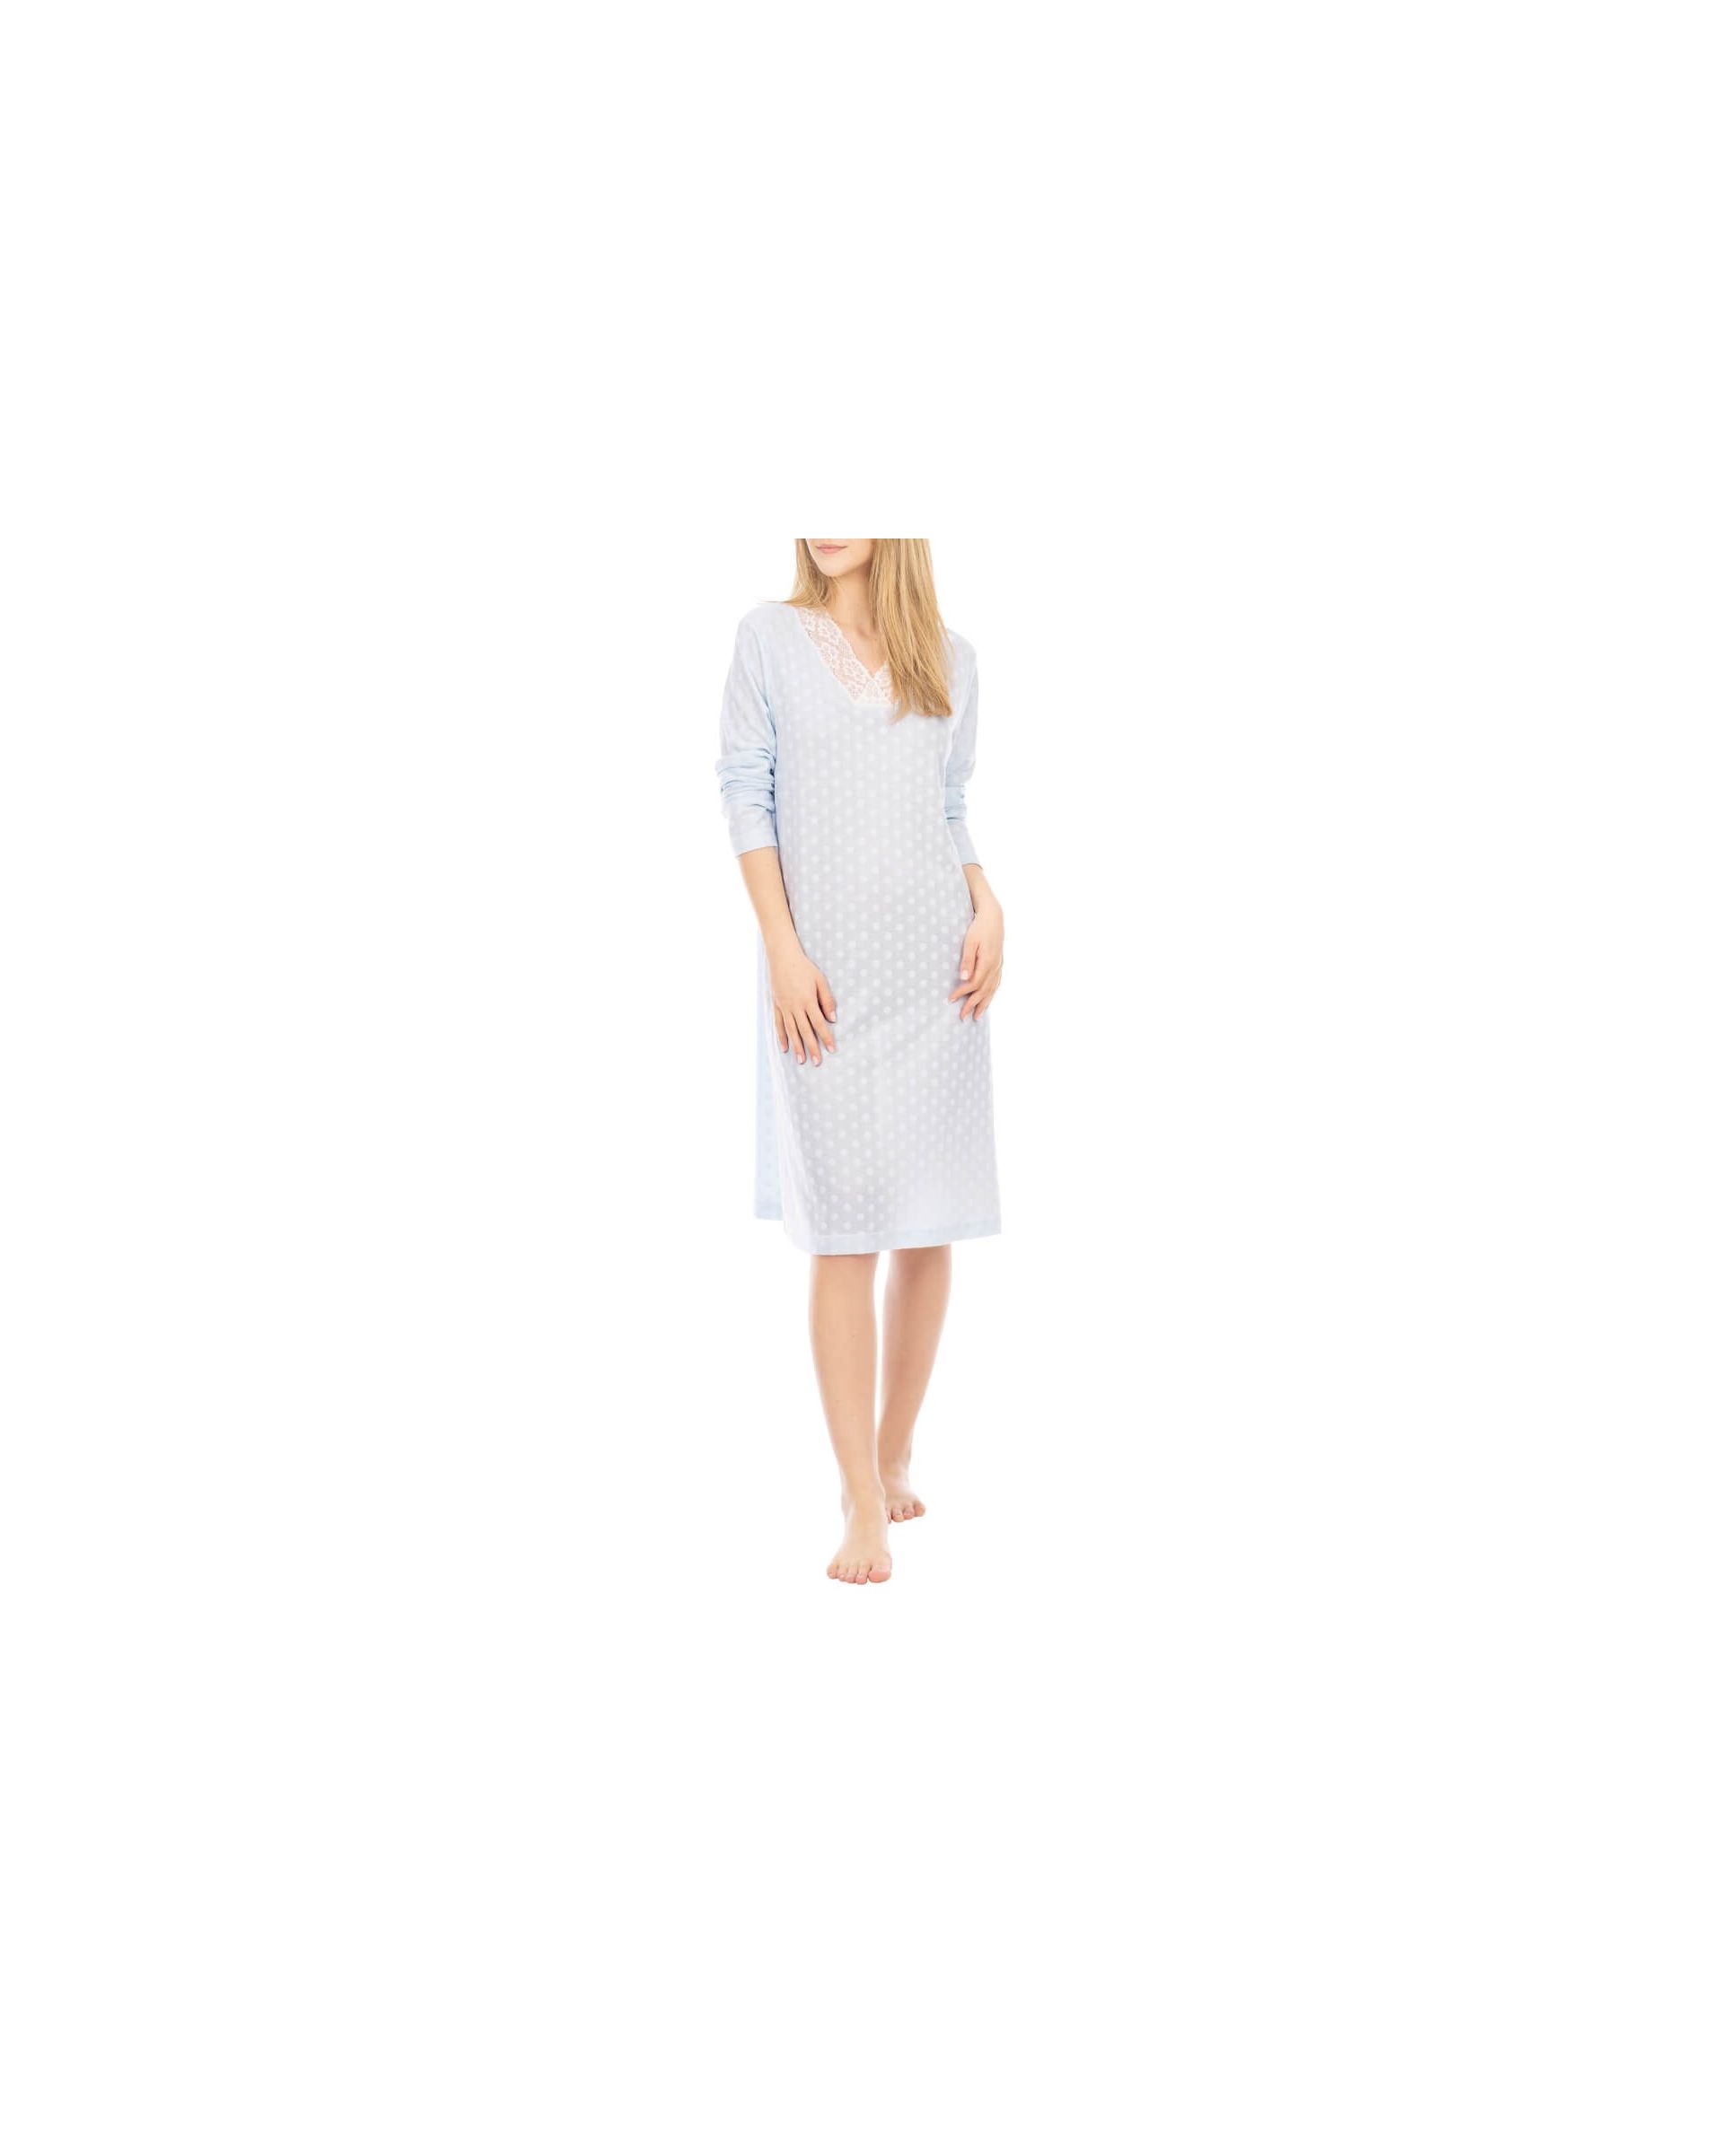 Women's long sleeved short blue nightdress with lace collar